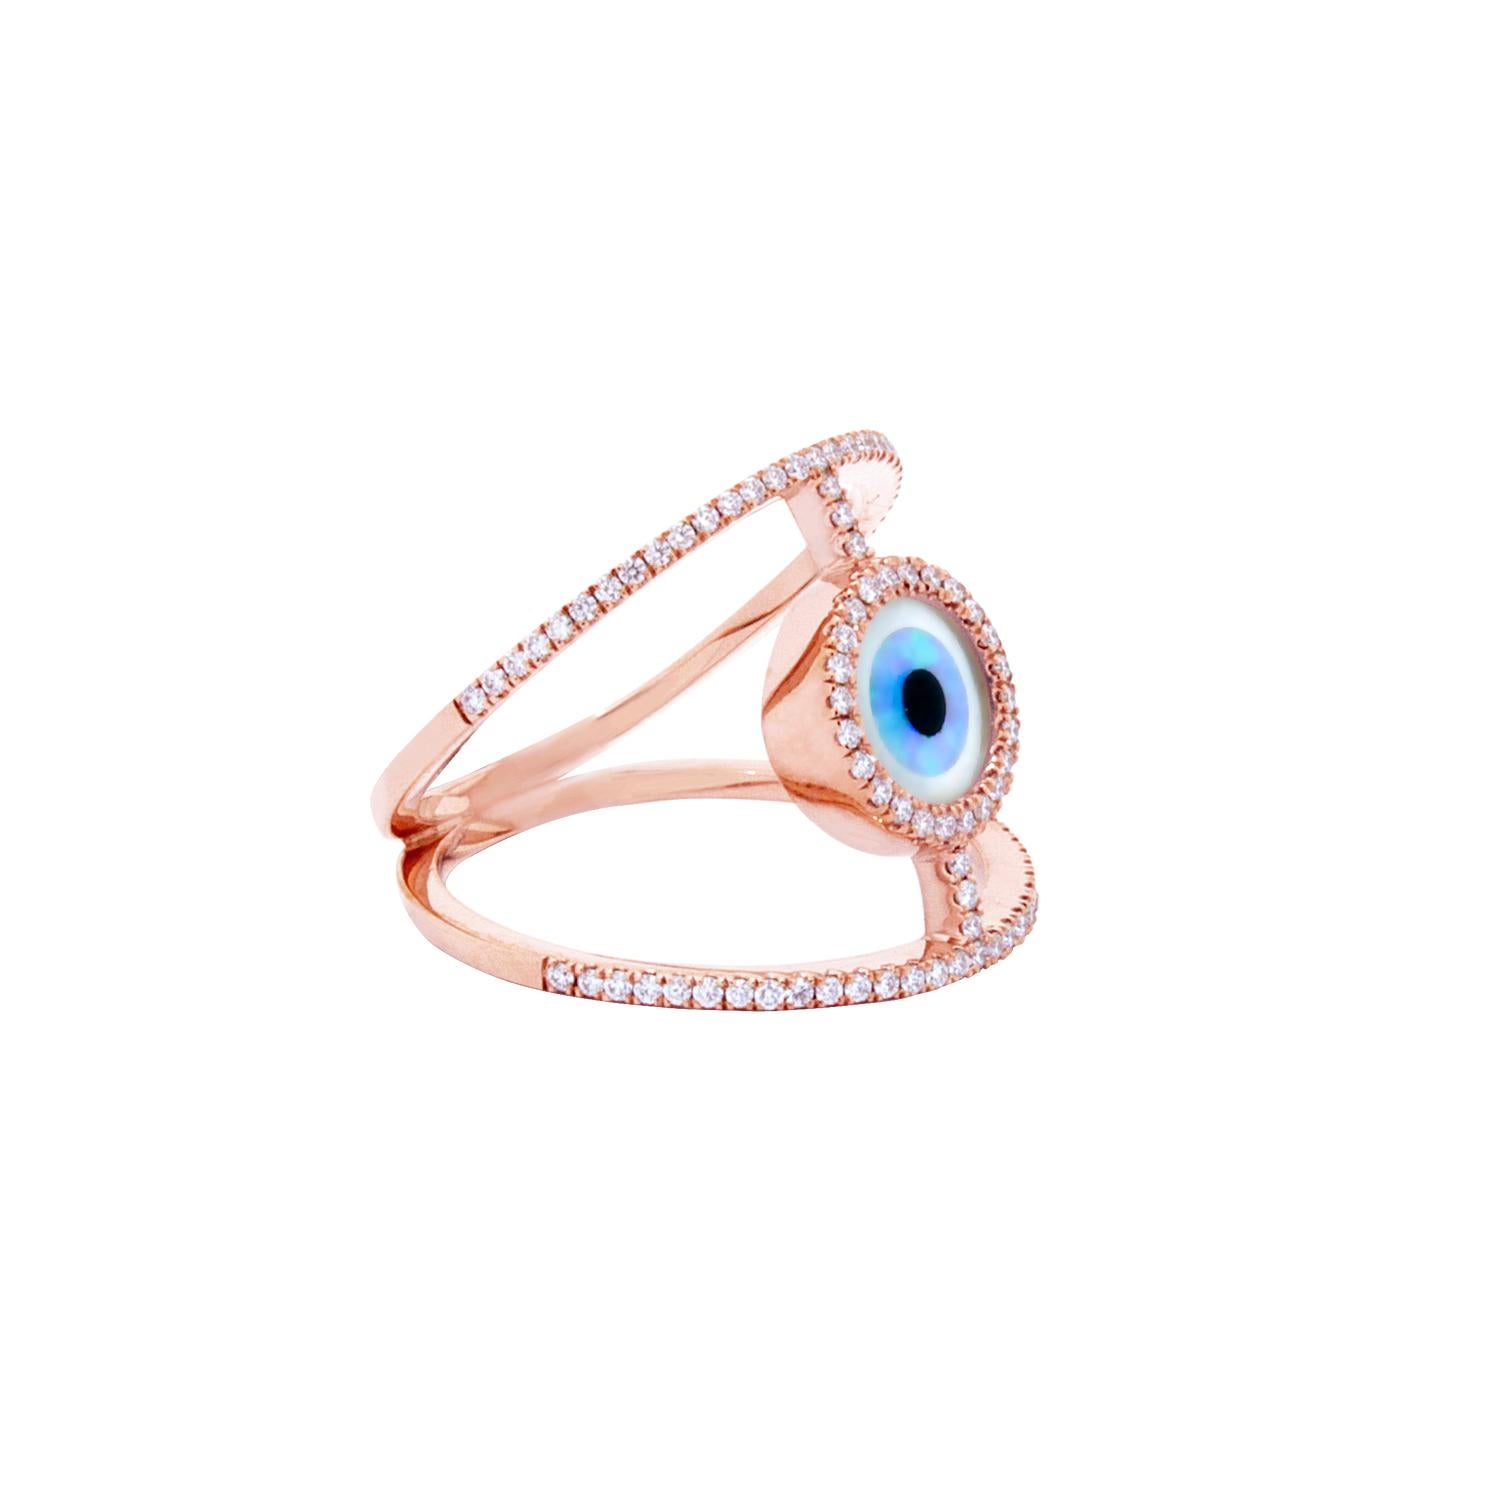 Modern 18 Karat Rose P Gold Ring with Diamonds, Turquoise and Mother of Pearl Inlay For Sale